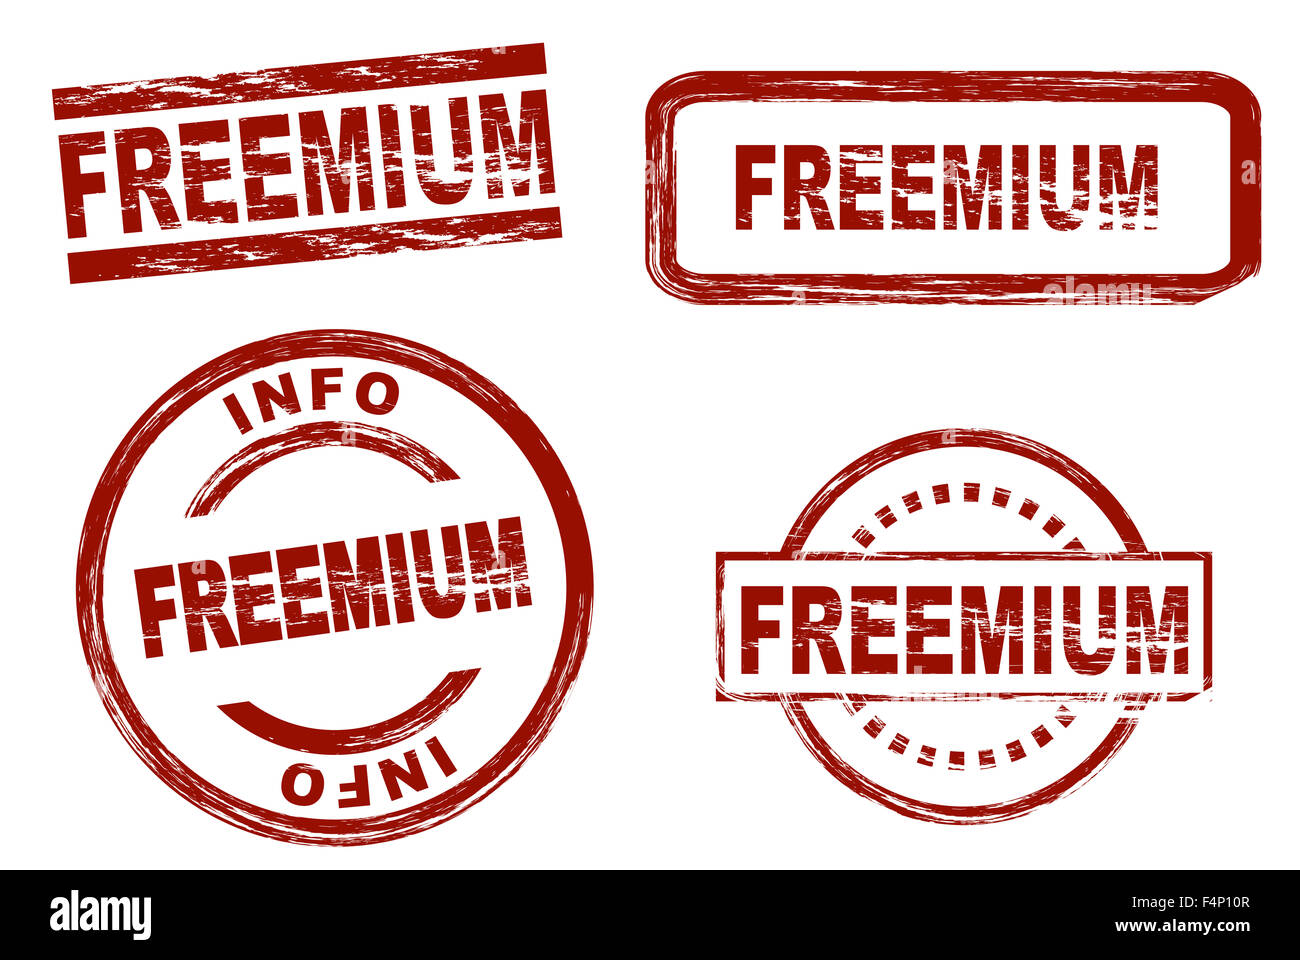 Set of stylized red ink stamps showing the term freemium. All on white background. Stock Photo